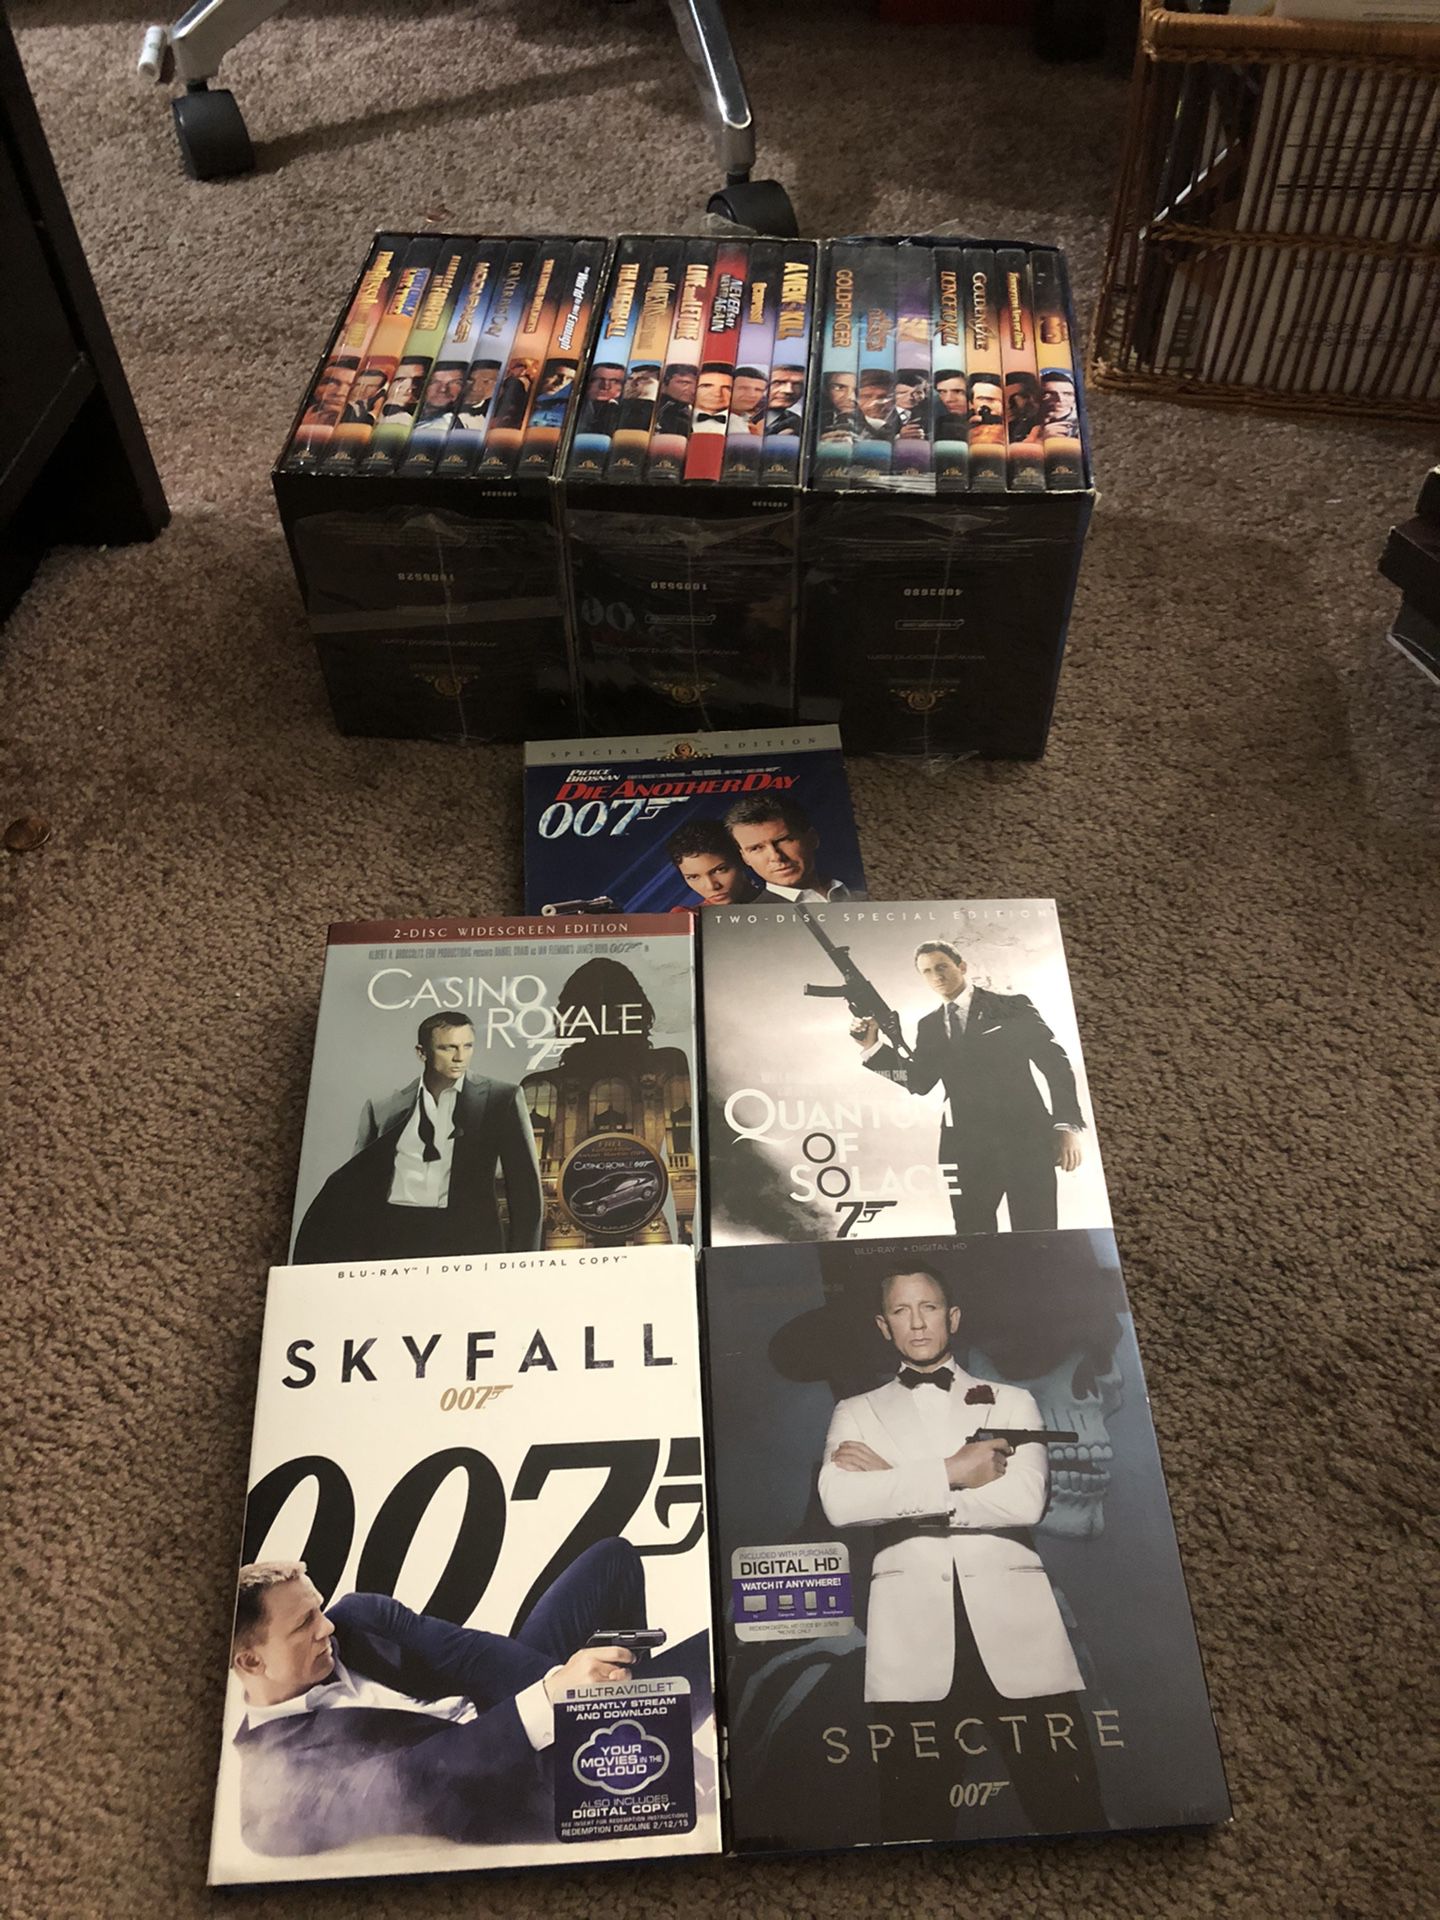 James Bond Collection of DVDs and Blu-ray